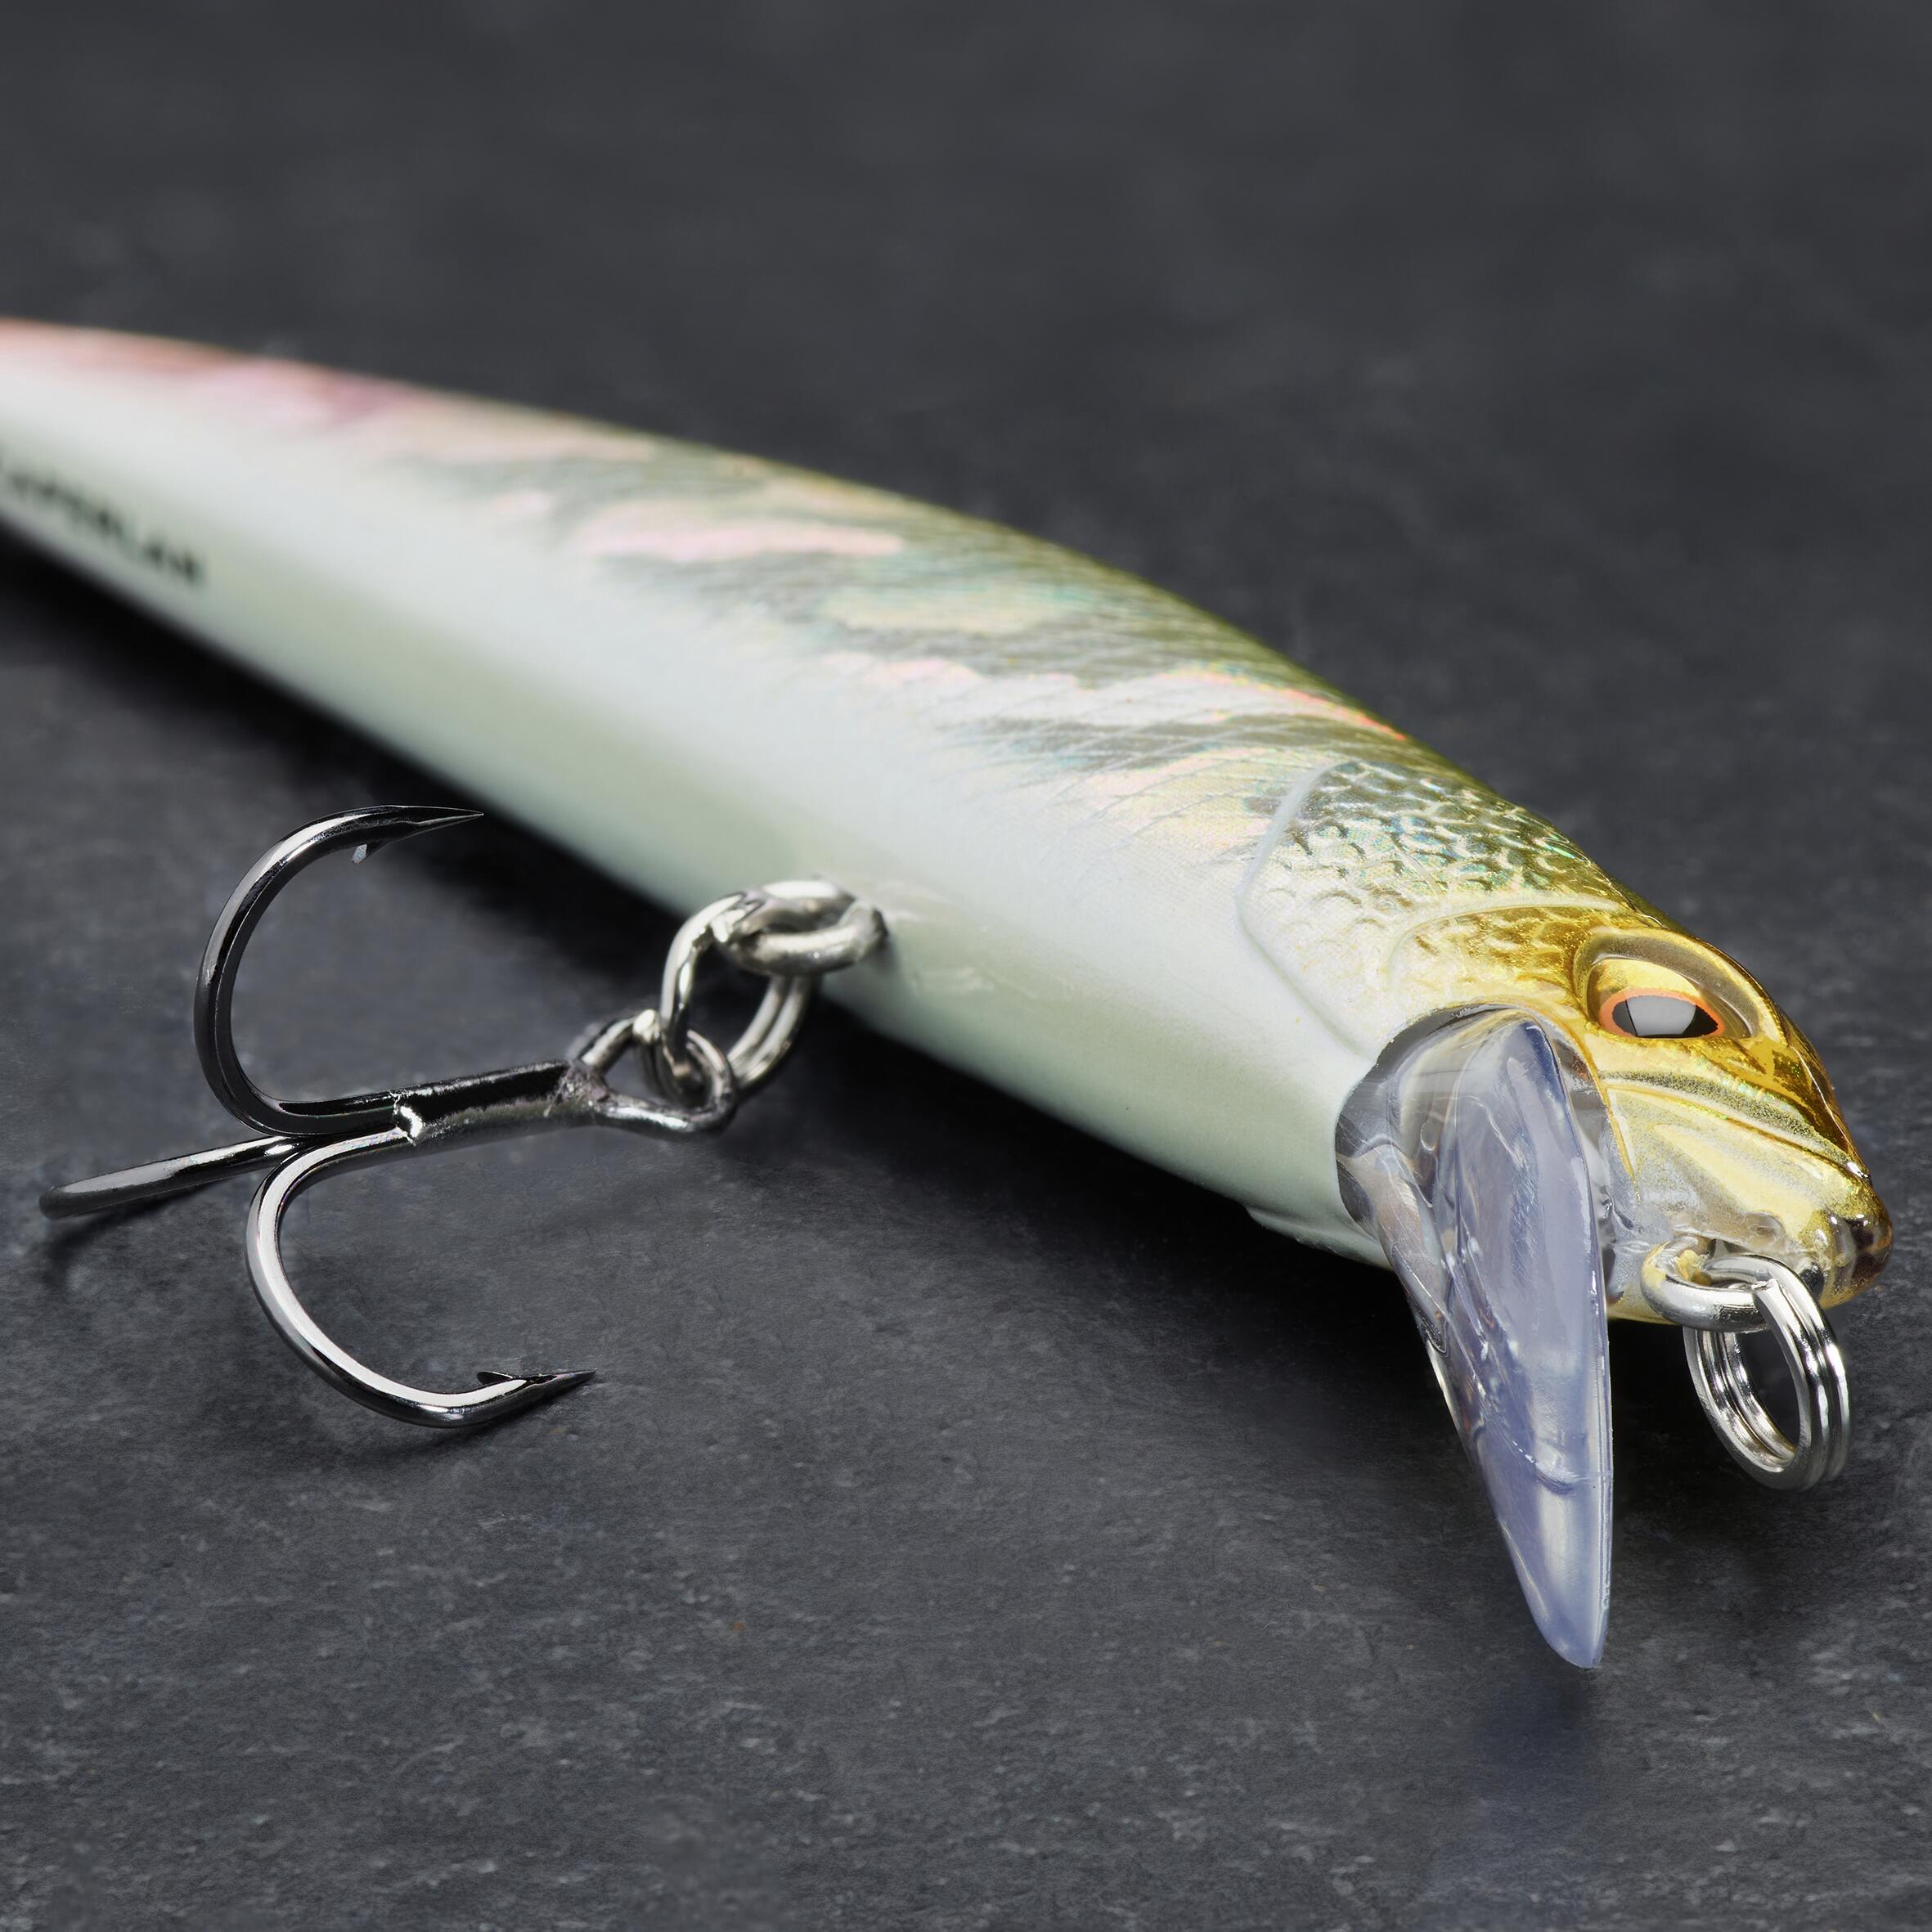 MINNOW HARD LURE FOR TROUT WXM MNWFS 70 US - GREEN BACK 3/4